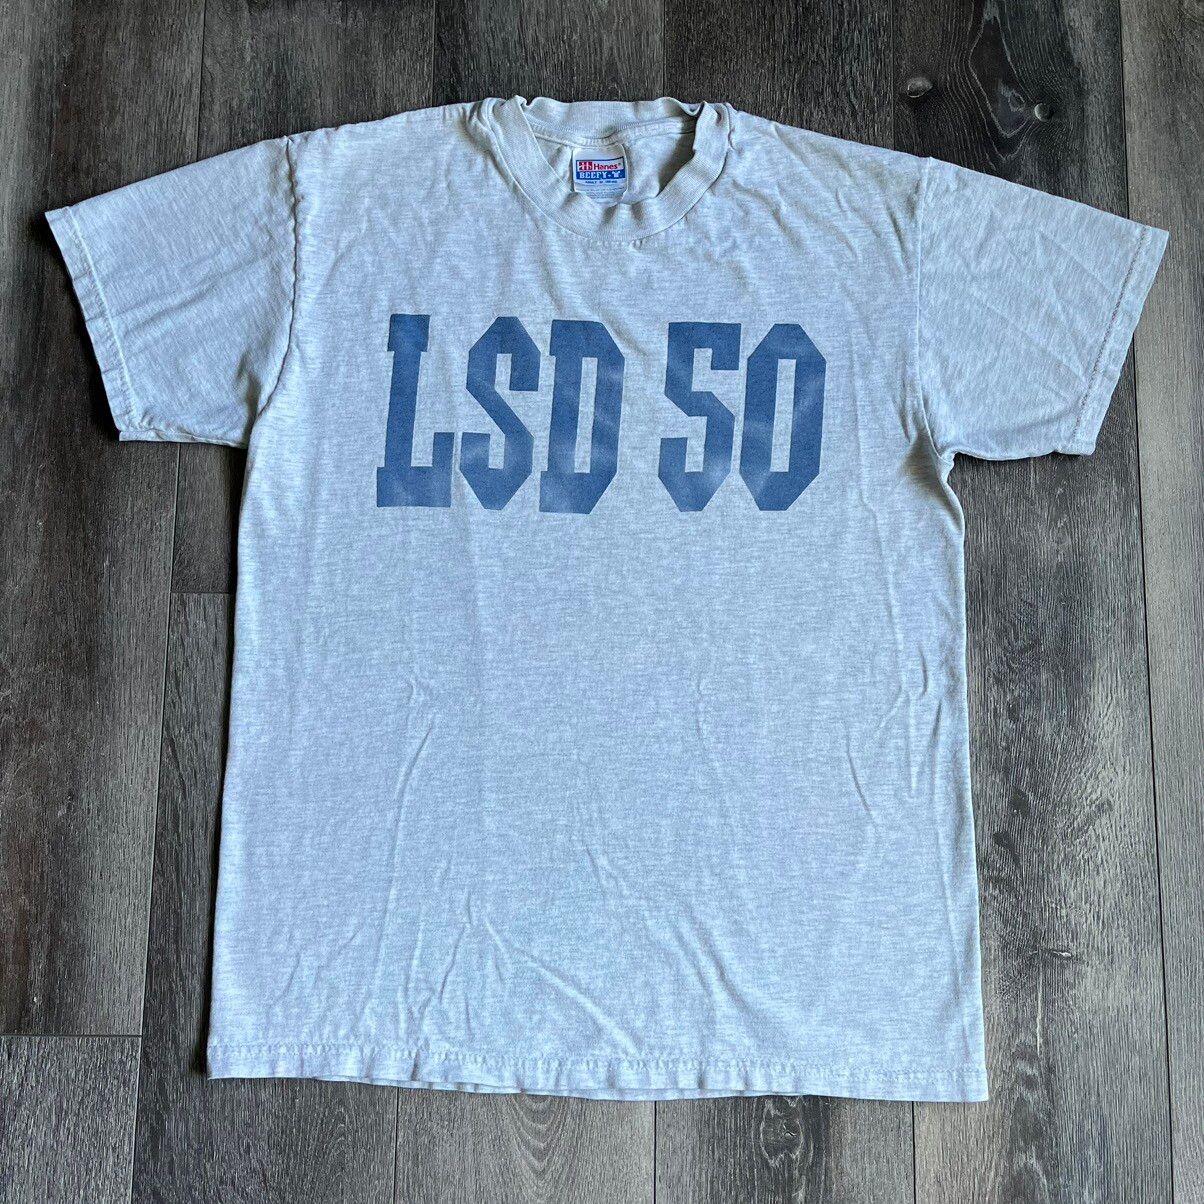 Pre-owned Military X Vintage 2000s Lsd 50 Us Navy Spell Out Ship Logo Tee Shirt In Navy/heather Grey